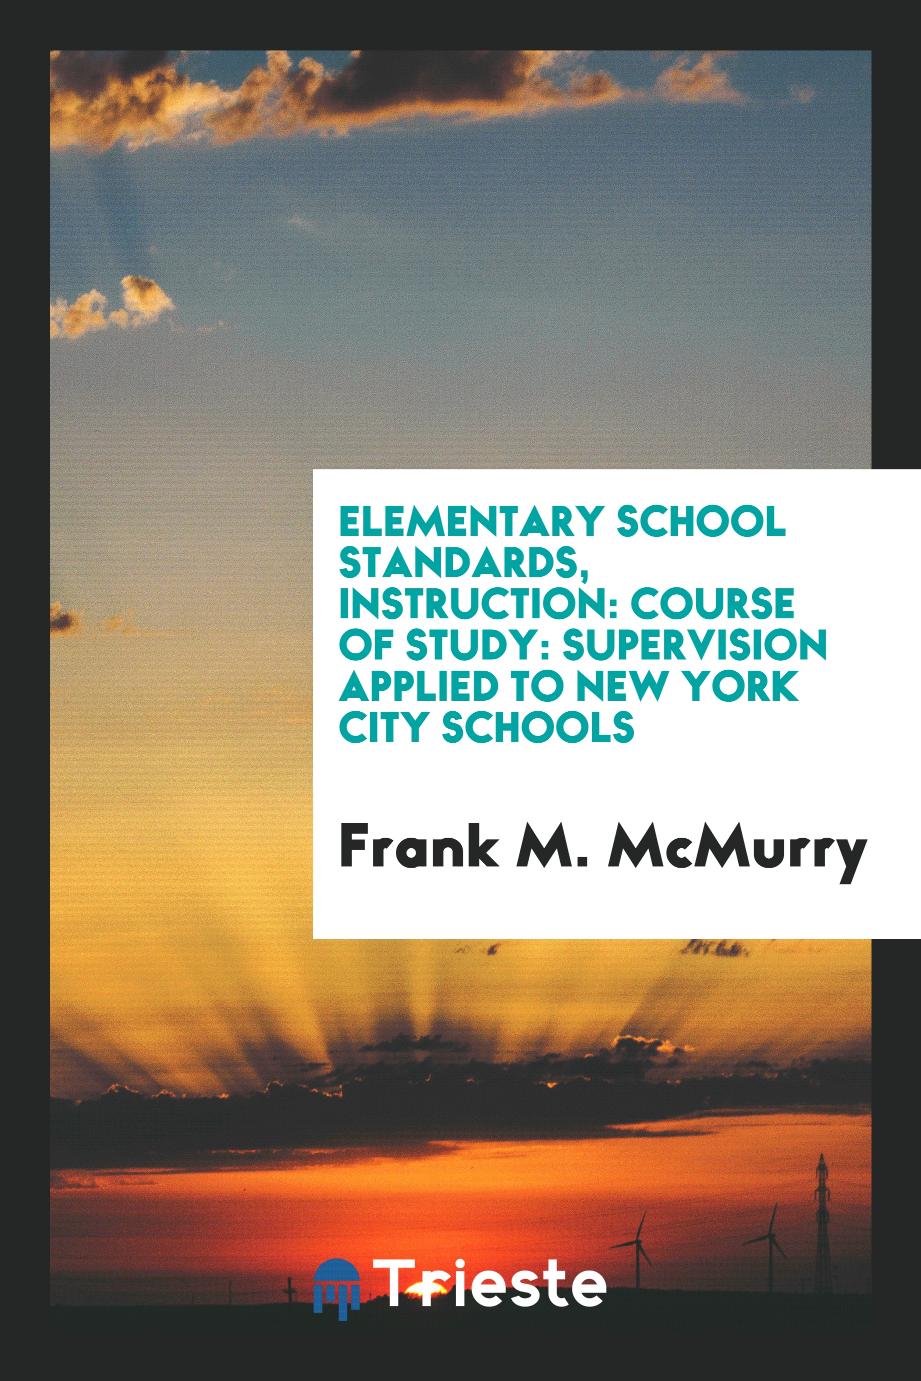 Elementary school standards, instruction: Course of study: Supervision applied to New York City Schools